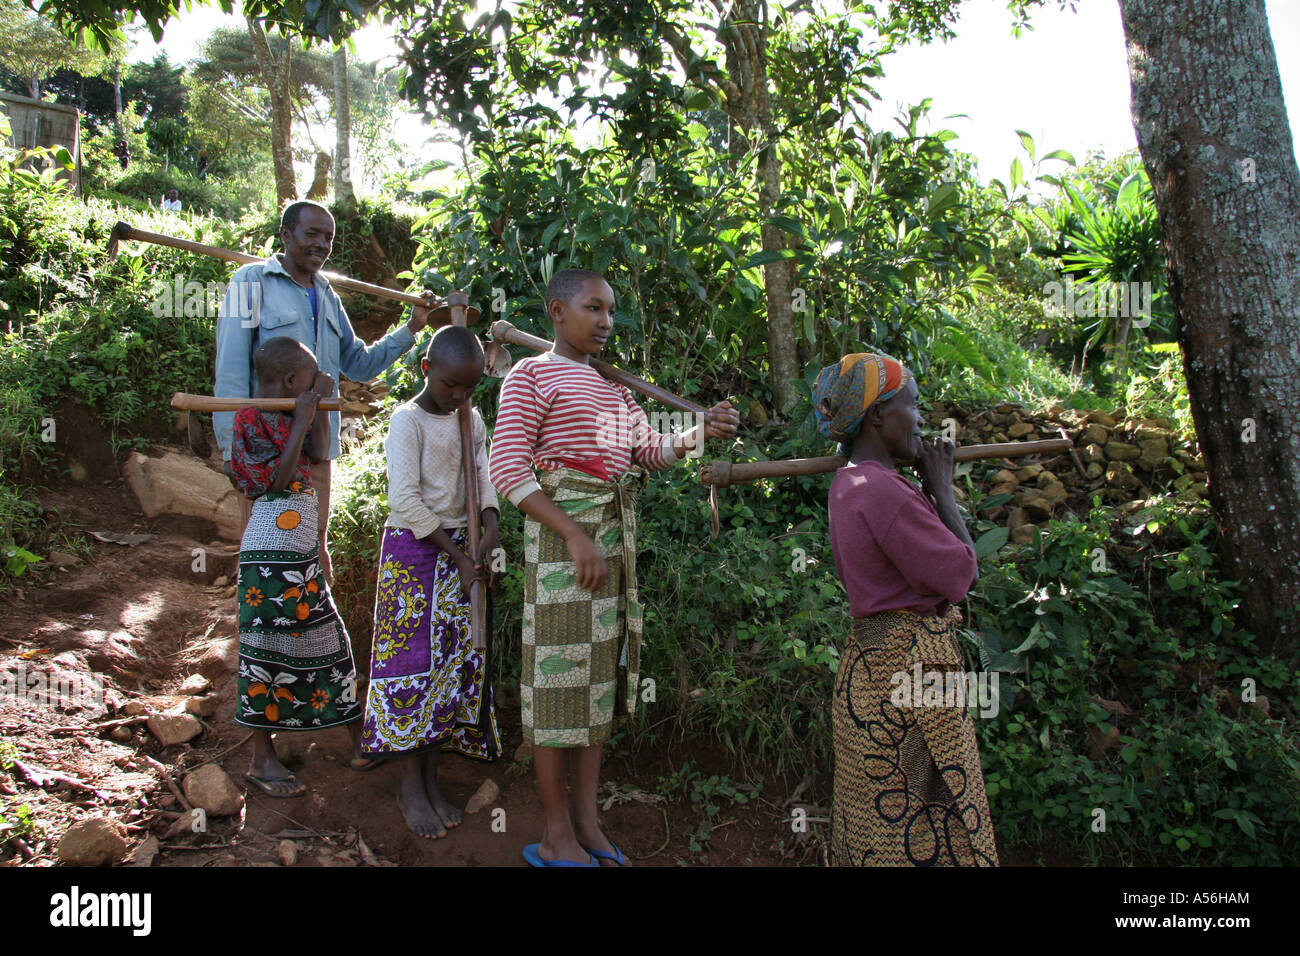 Painet iy8575 tanzania photo 2005 country developing nation less economically developed culture emerging market minority Stock Photo